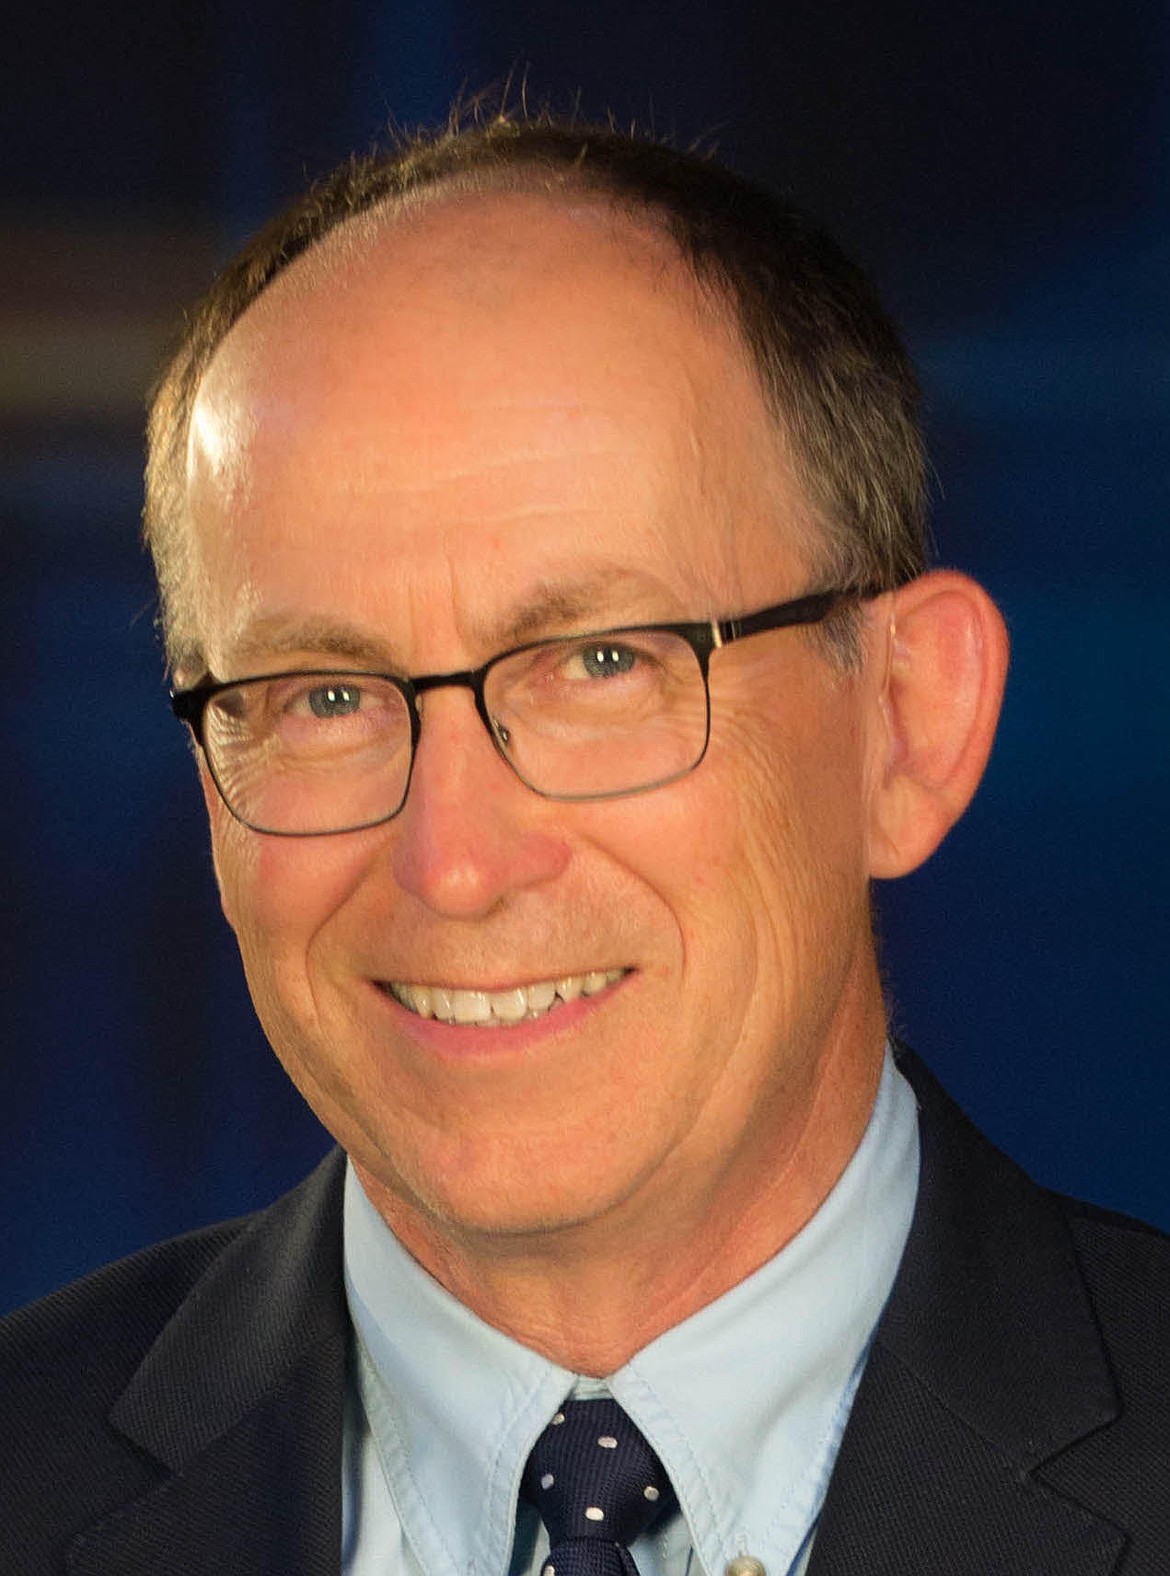 Montana political reporter Mike Dennison will sign his new book &#147;Inside Montana Politics: A Reporter&#146;s View from the Trenches,&#148; Saturday, Oct.19, at the Kalispell Brewing Company.